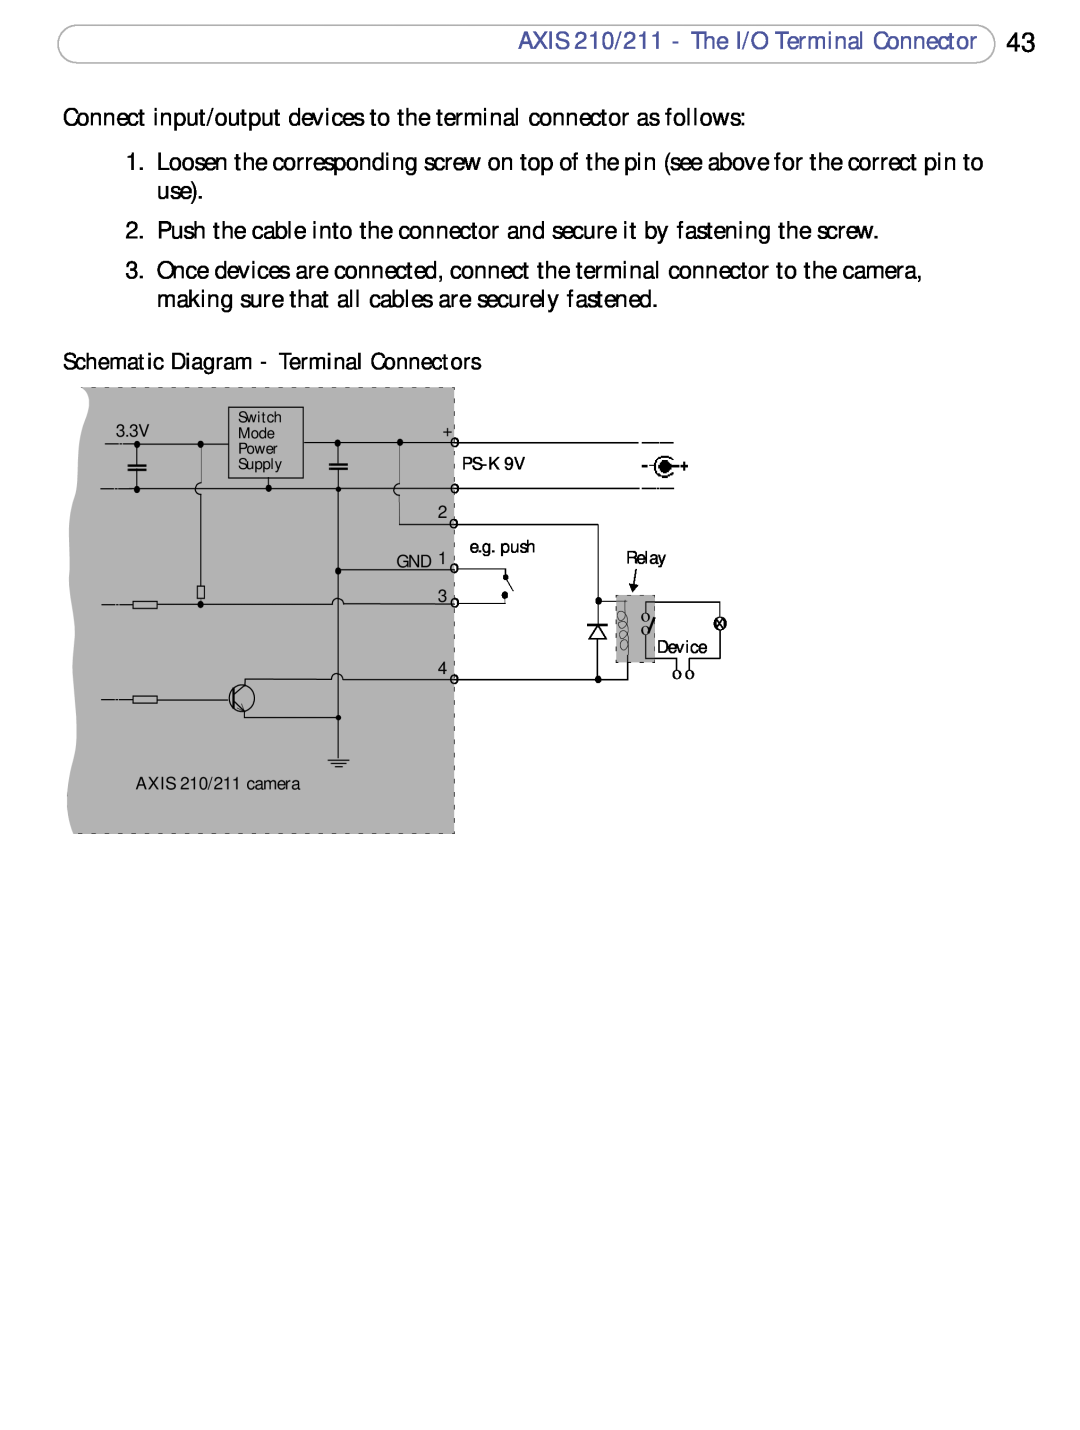 Axis Communications user manual AXIS 210/211 - The I/O Terminal Connector, Schematic Diagram - Terminal Connectors 